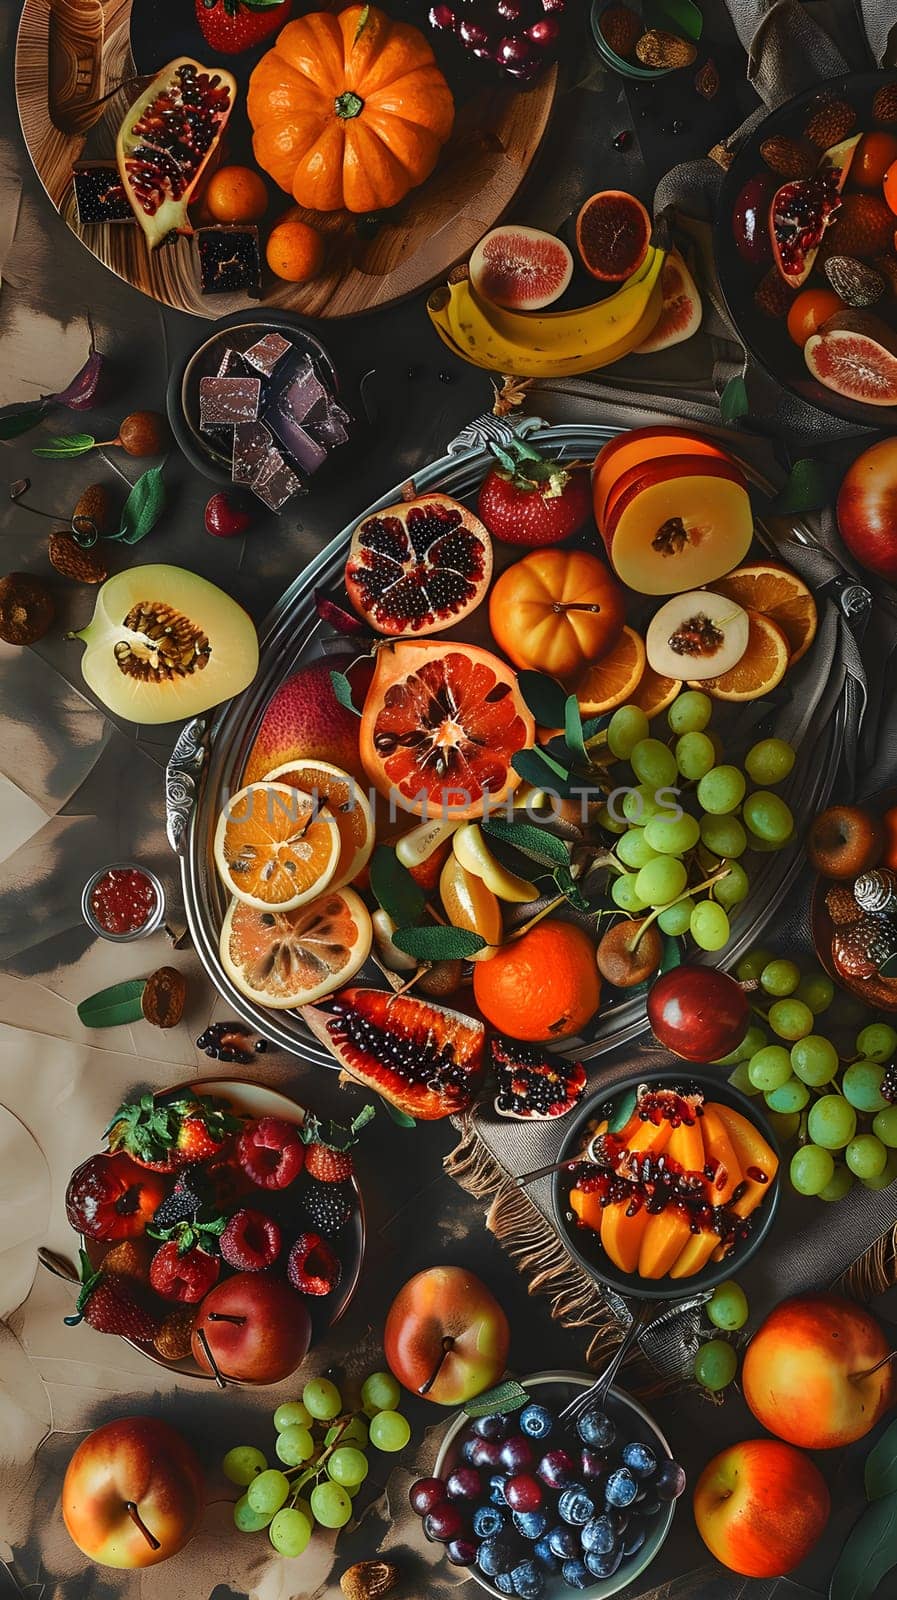 Various fruits and vegetables are displayed on the table, including grapes, berries, and other natural foods. These ingredients can be used in recipes to create delicious and nutritious cuisine